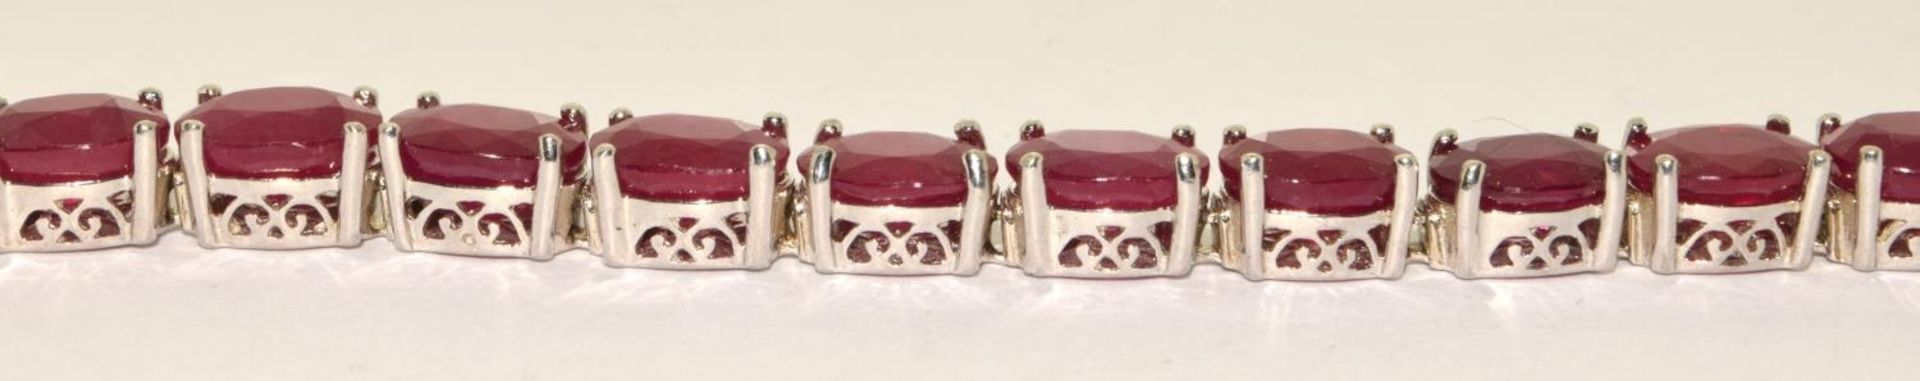 Ruby excellently made fully hallmarked silver bracelet approx 30cts - Image 3 of 4